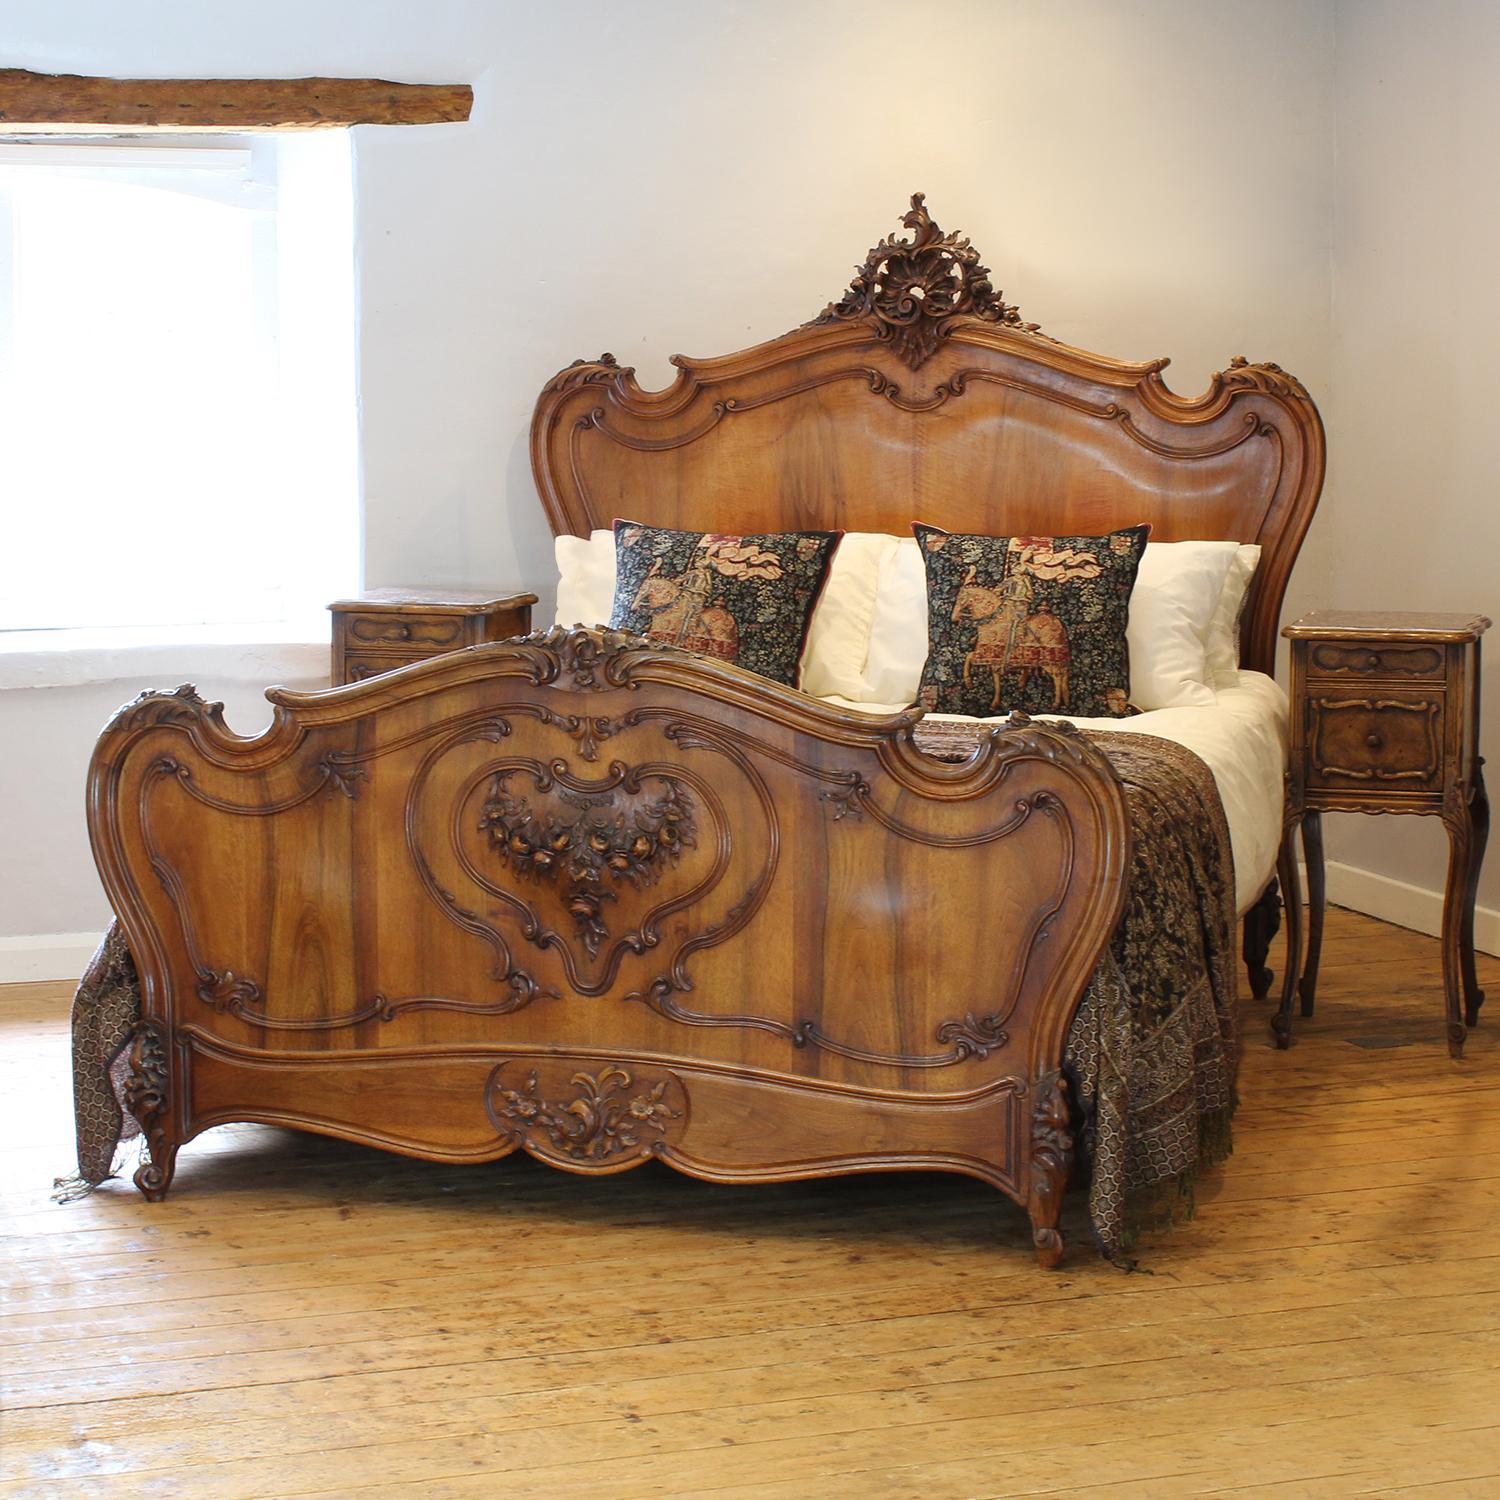 A superb example of a Louis XV style bedstead in solid walnut in a flamboyant rococo design, with pronounced shoulders, decorative beading, ornately carved pediment and central shield carving in foot panel of a garland of roses. The finely grained